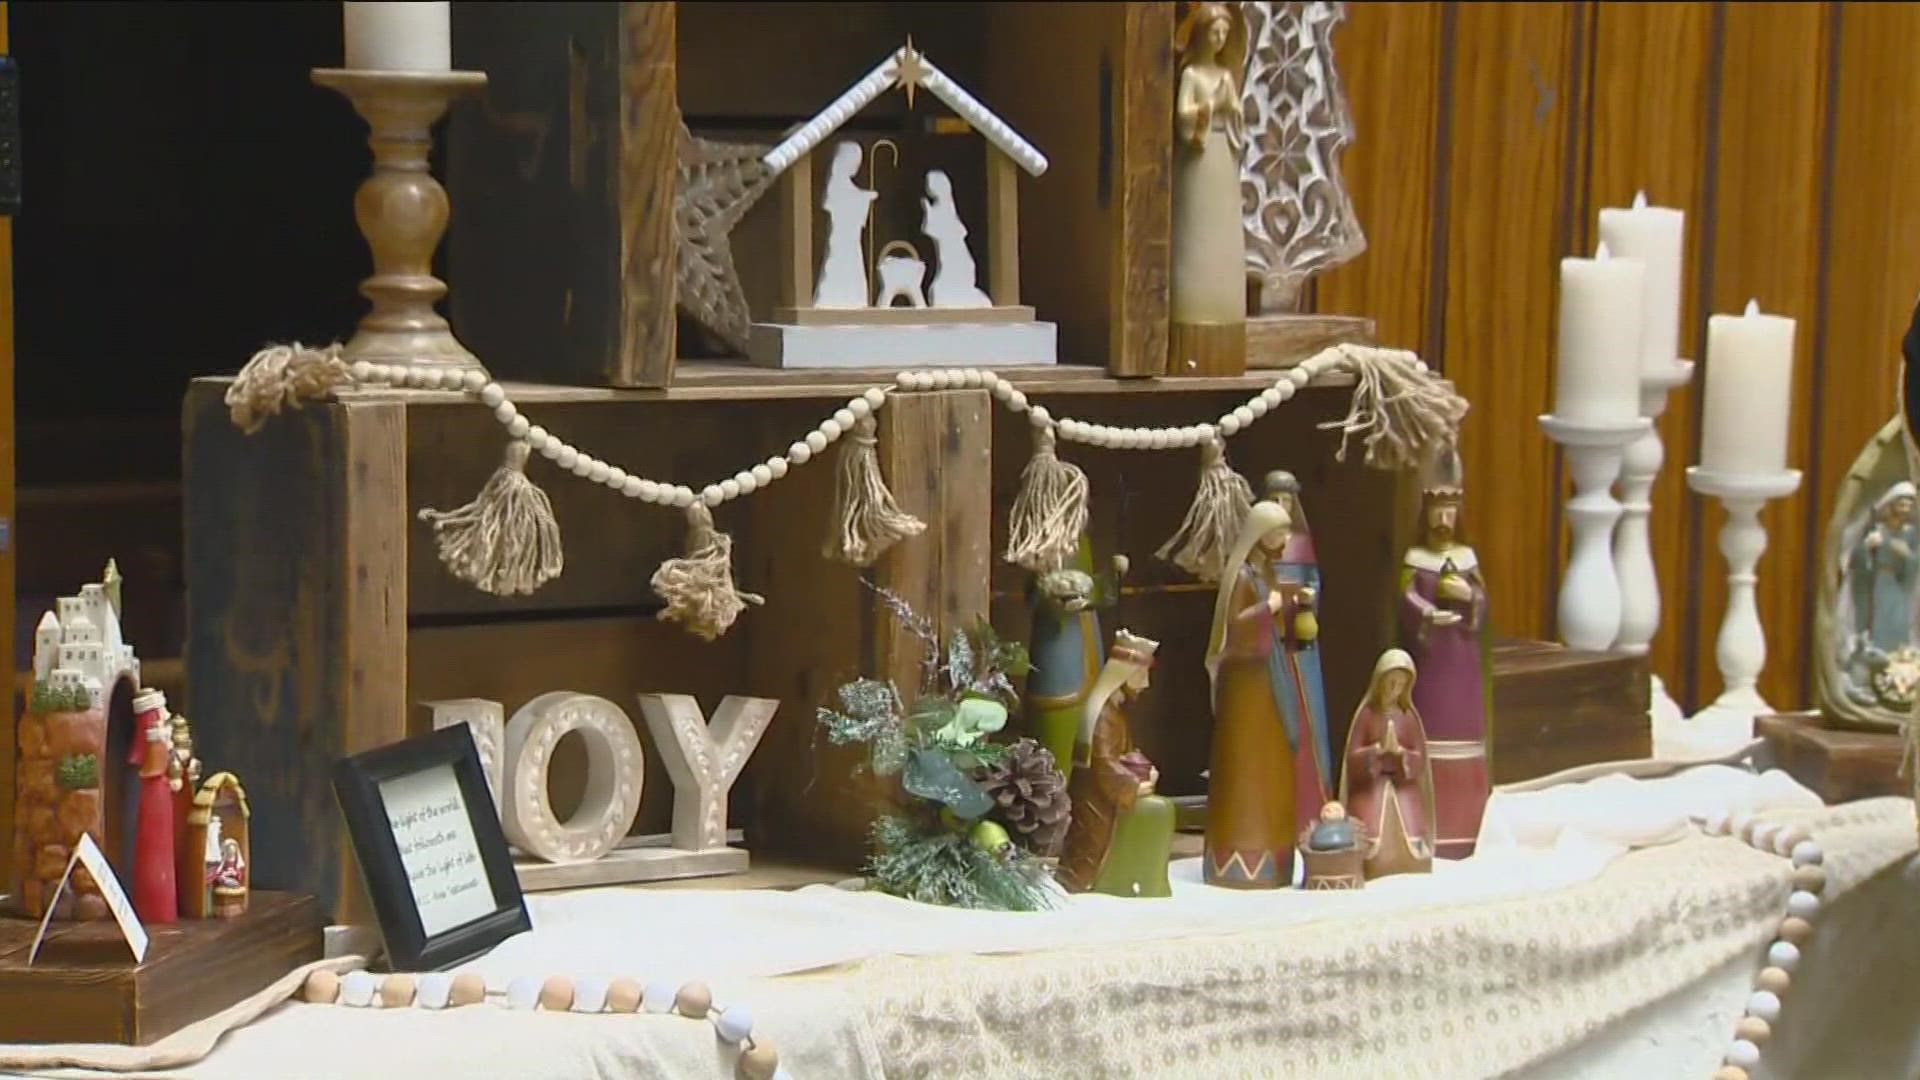 Nativity scenes from all over the world are at the Church of Jesus Christ of Latter-day Saints at 2650 S. Five Mile Rd. Open Nov. 18 and 19, noon to 8 p.m.